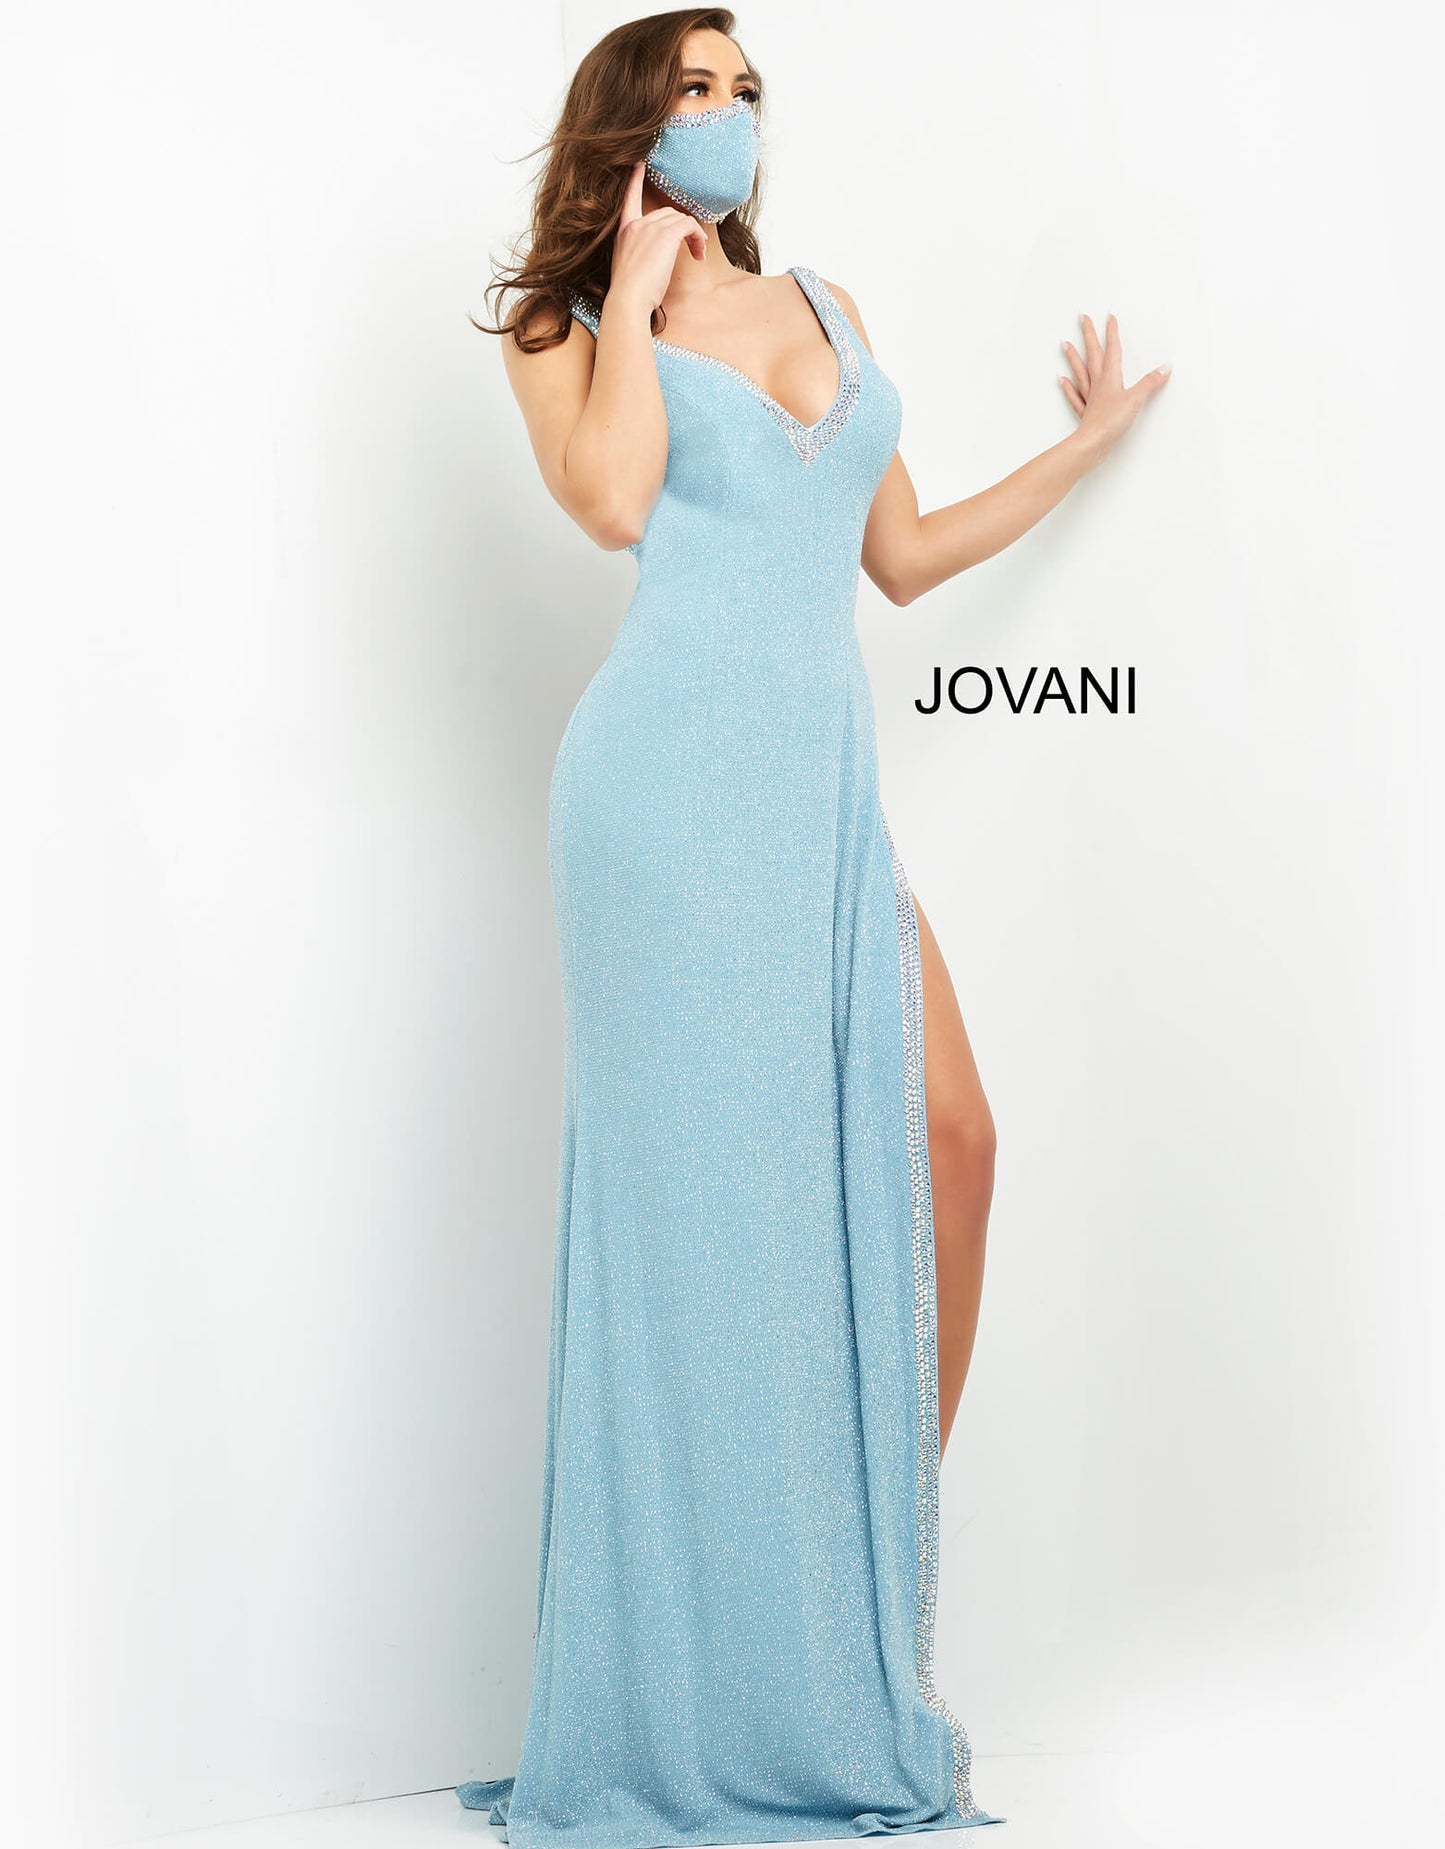 Jovani 06276 Glitter V neckline fitted prom dress with high side slit evening gown